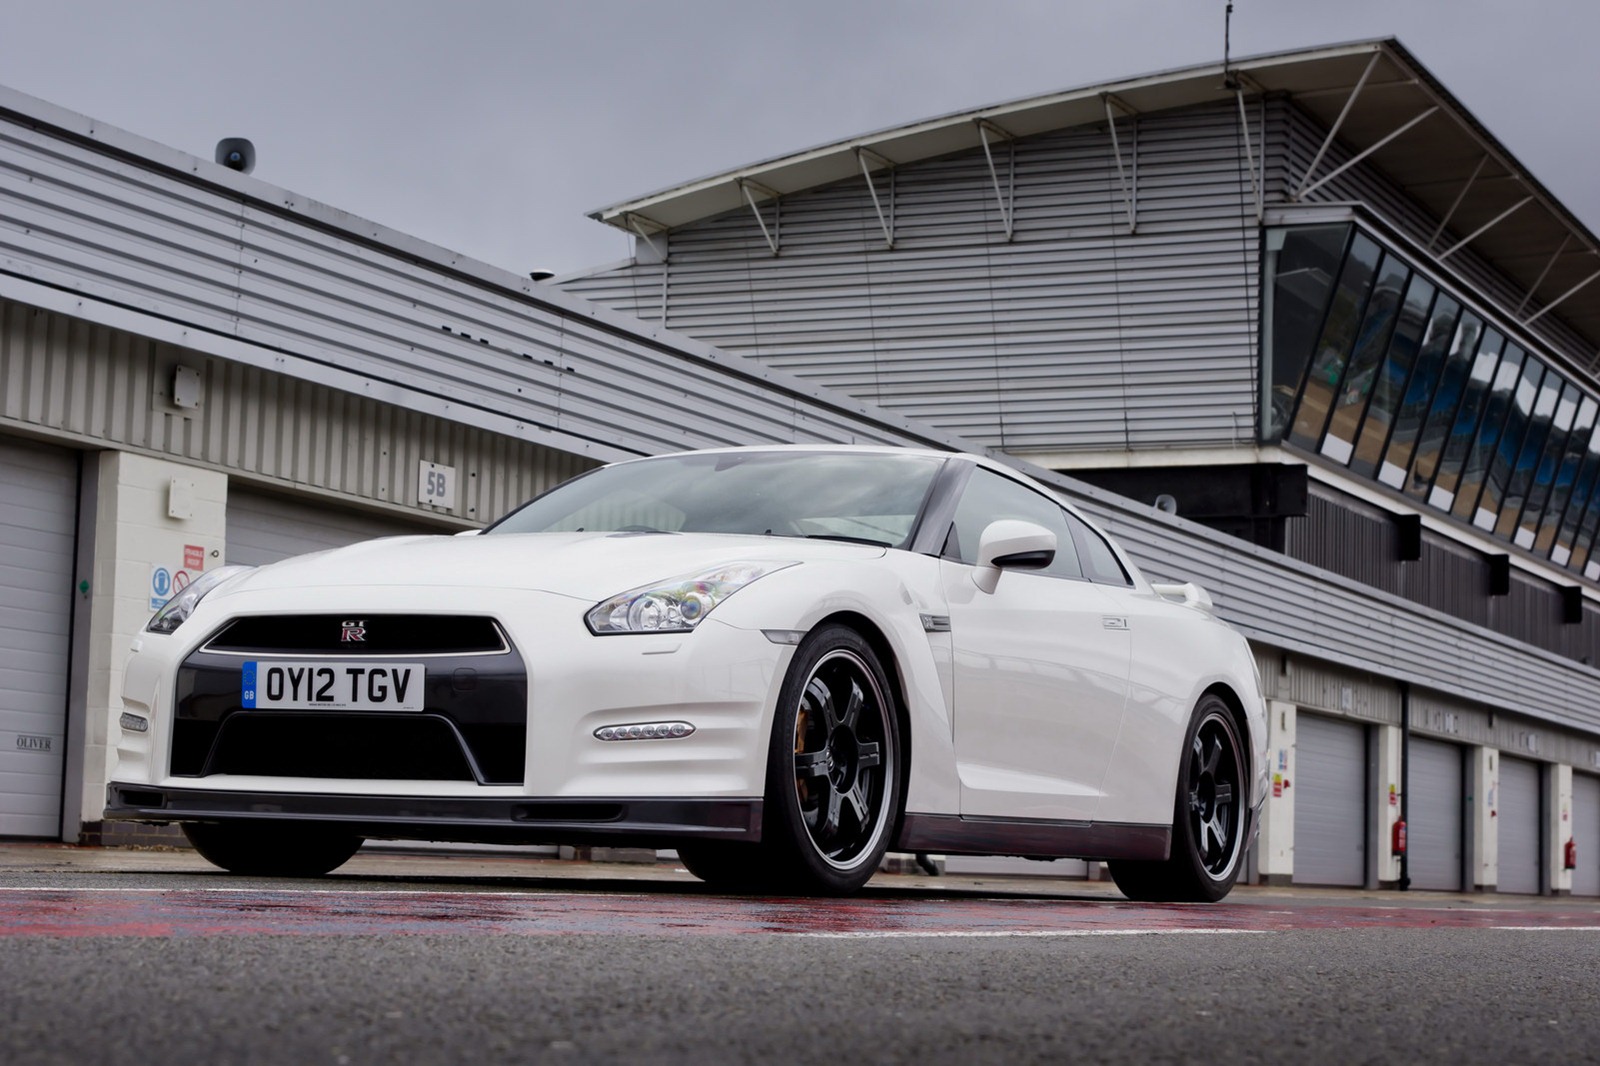 Nissan GT-R Track Pack Edition